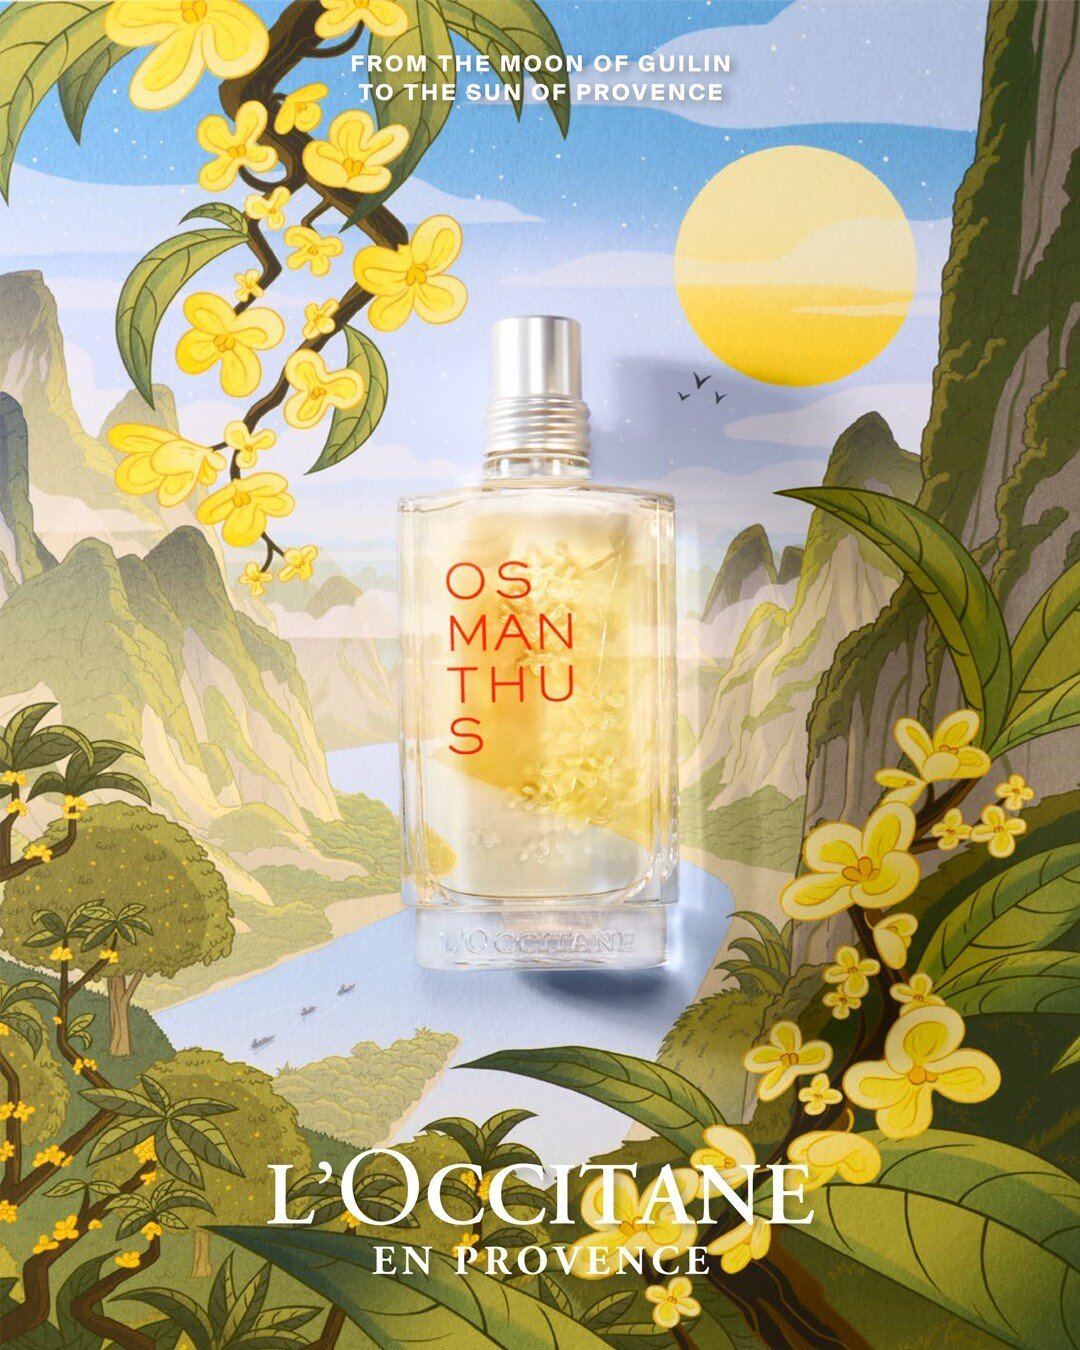 Here is the full image I made for @loccitane_uk_ire for their Osmanthus Eau de Toliette with and without the bottle. As always big thanks to my agent @everyone_agency for all their hard work.
.
.
.
#loccitane #illustration #colour #roberthunterillust